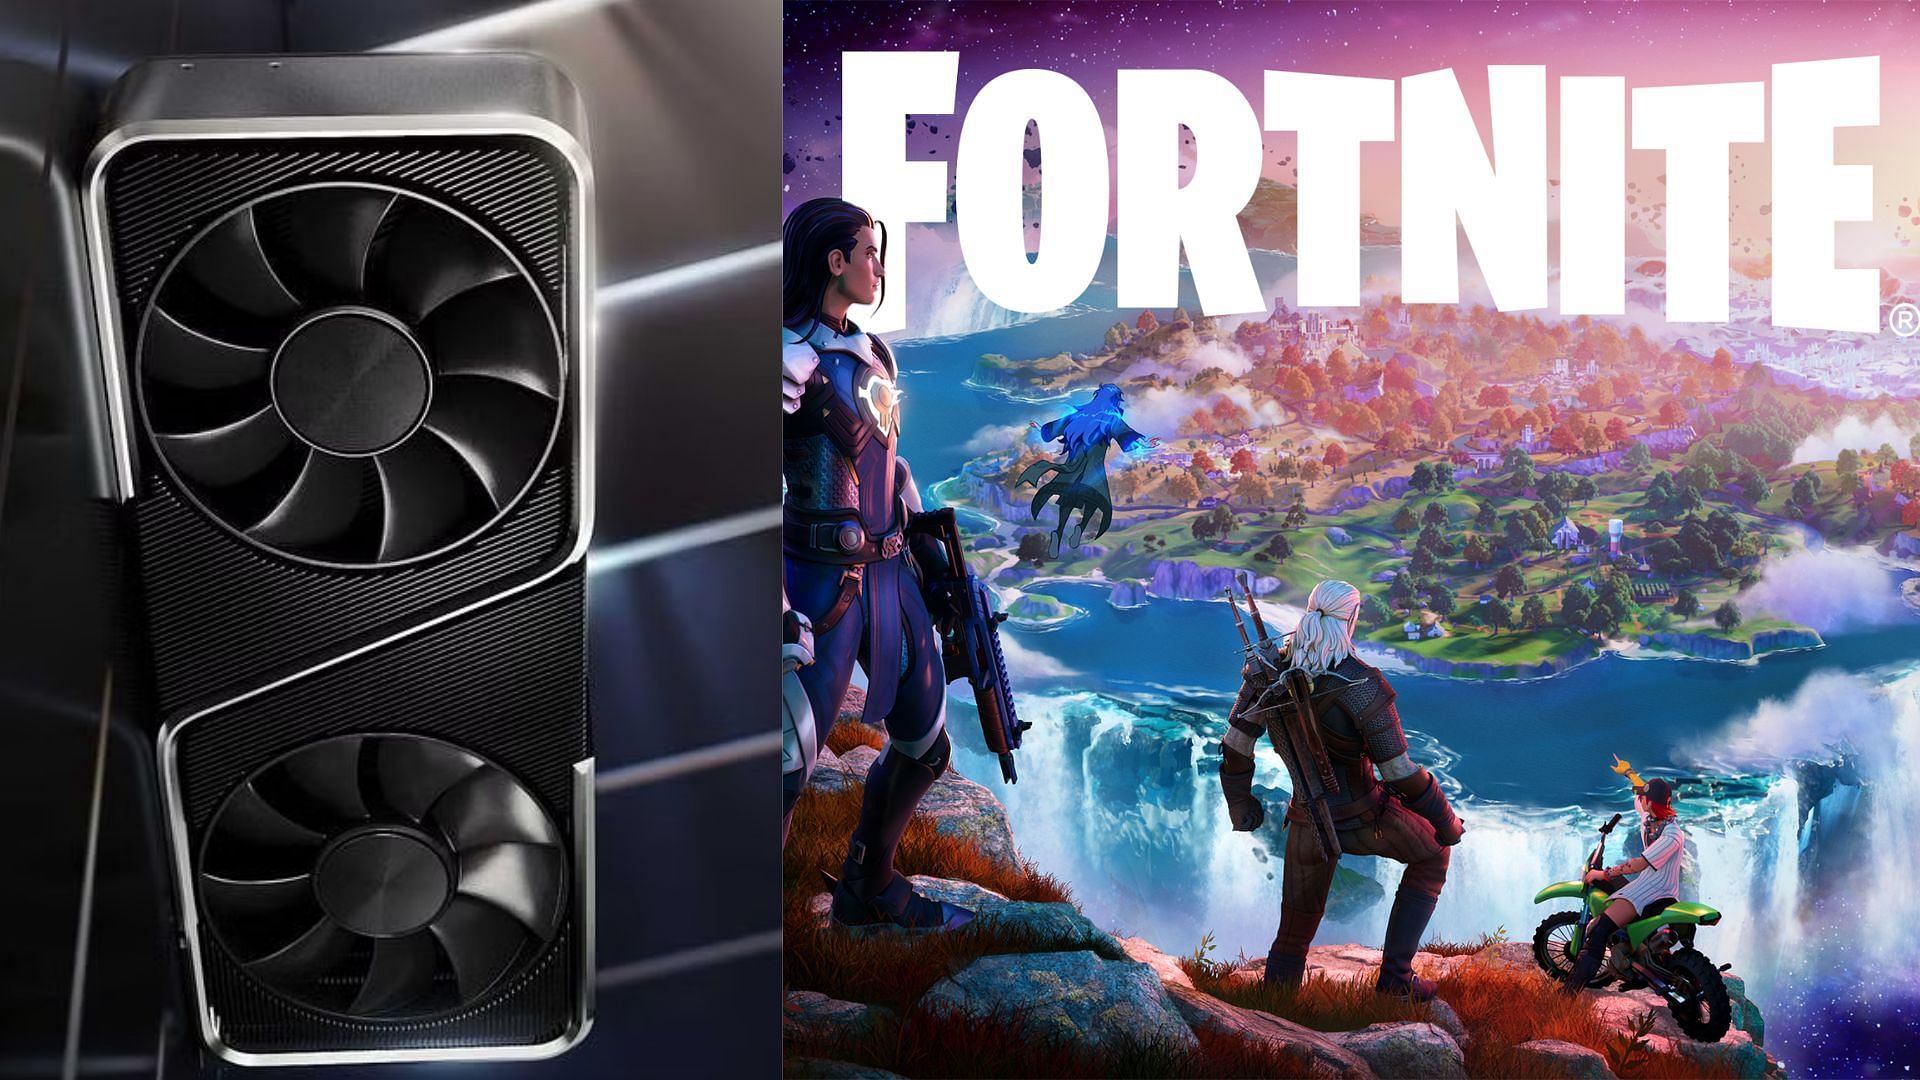 RTX 3060 FE and Fortnite cover